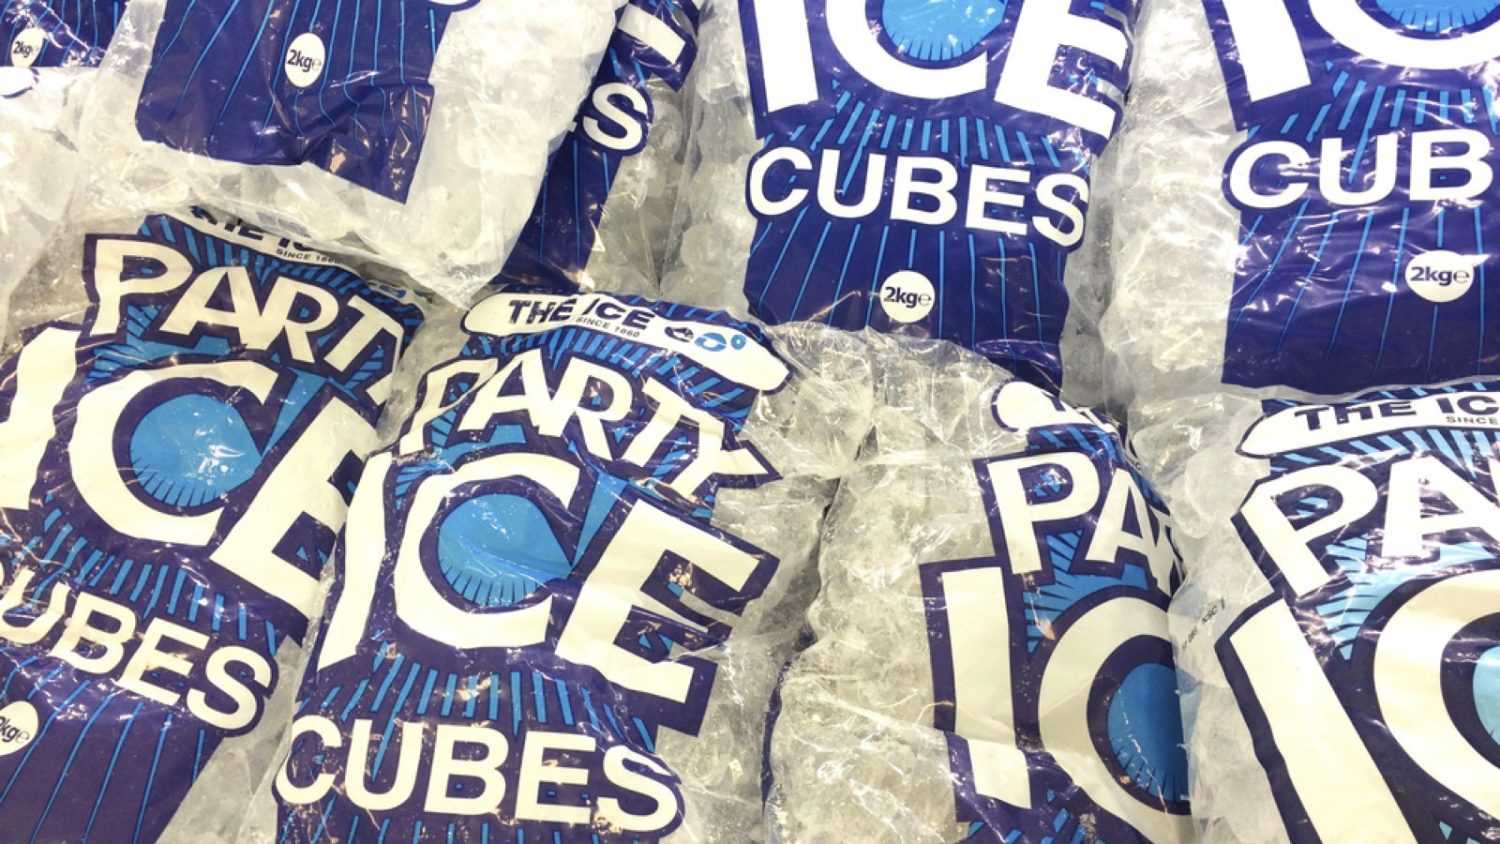 Bagged Ice cubes